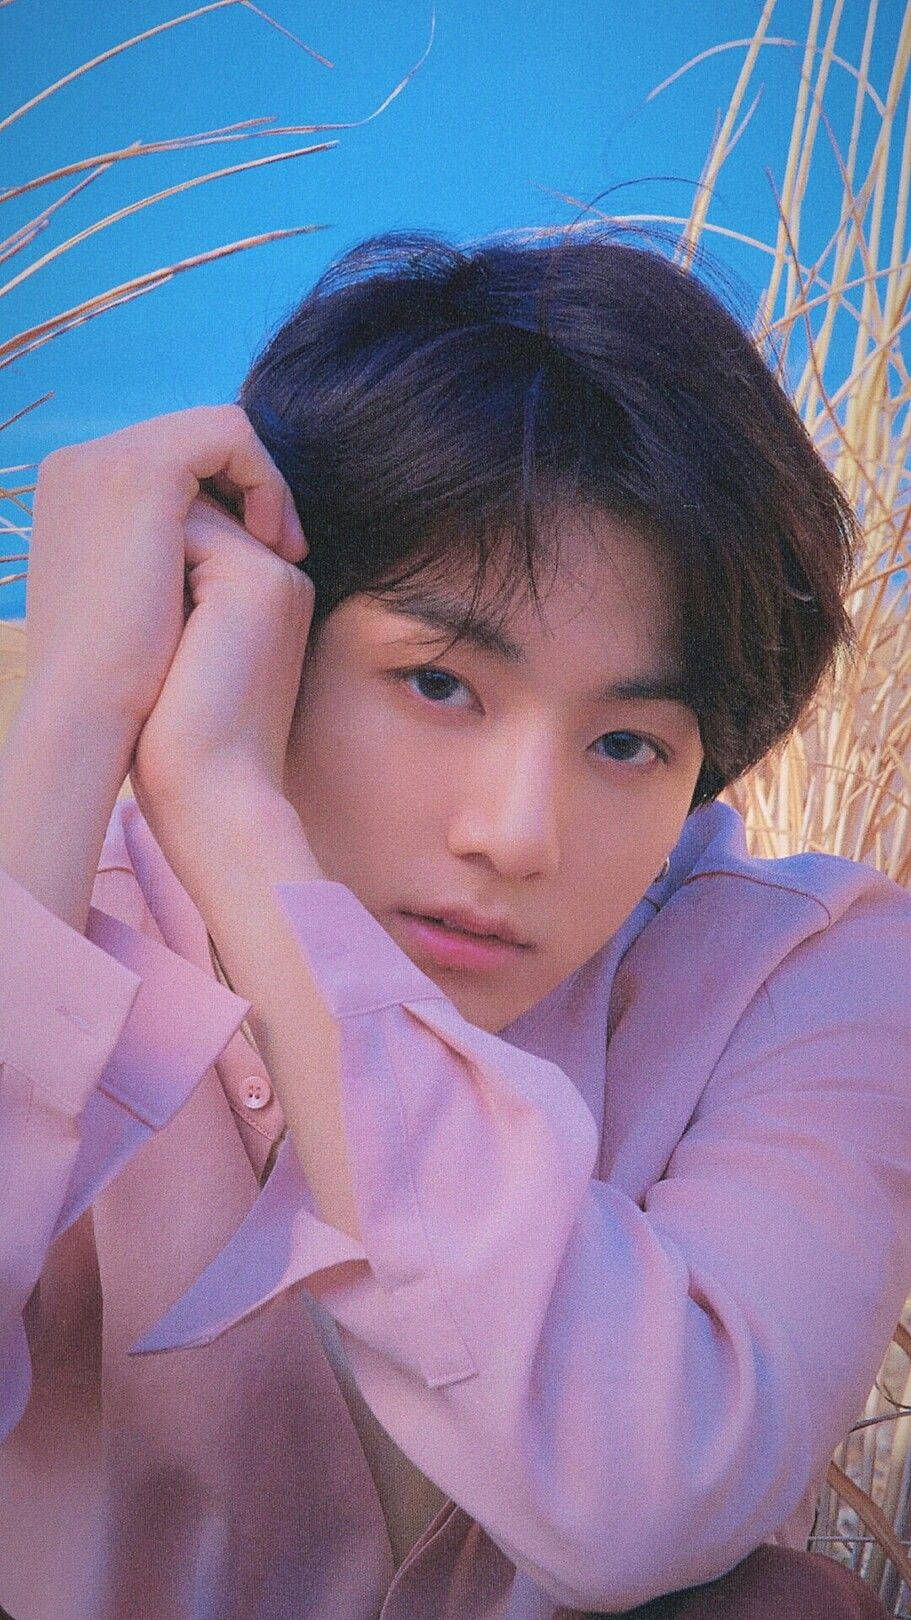 Bts Jungkook In A Field Background